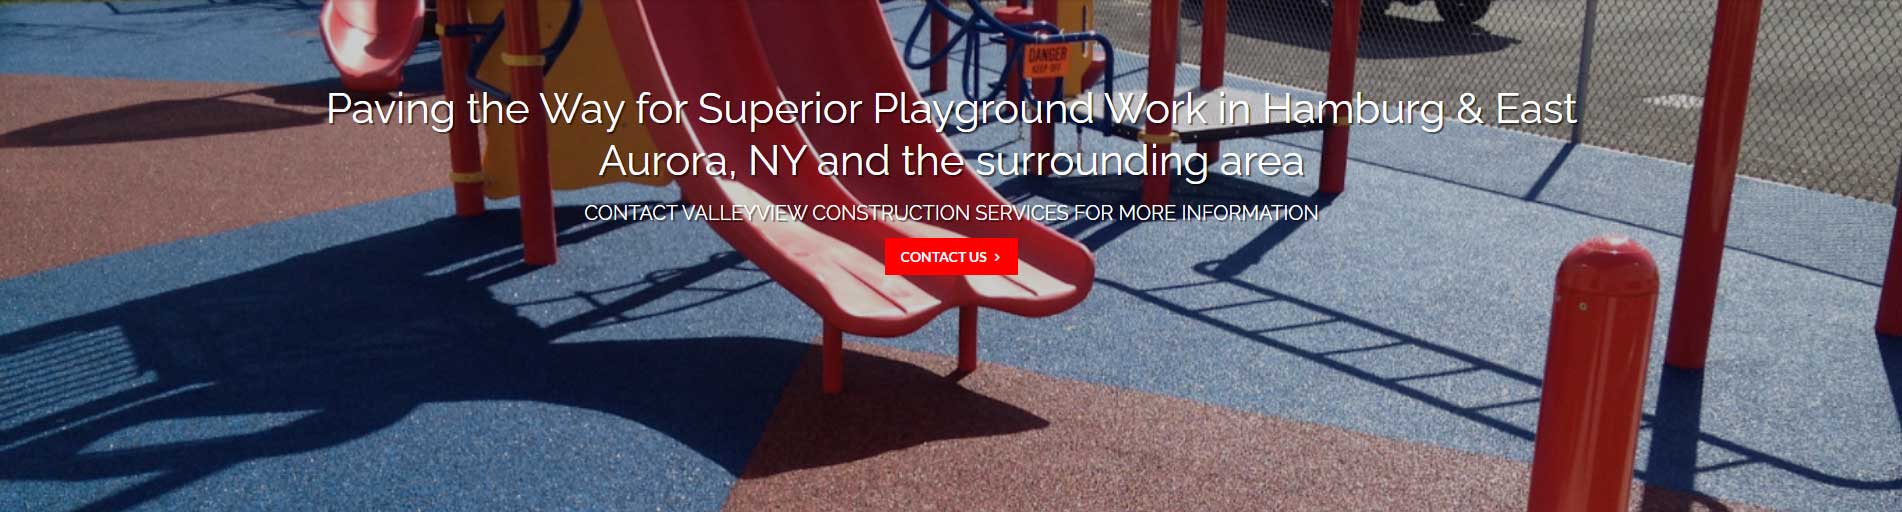 ValleyView Commercial Playgrounds